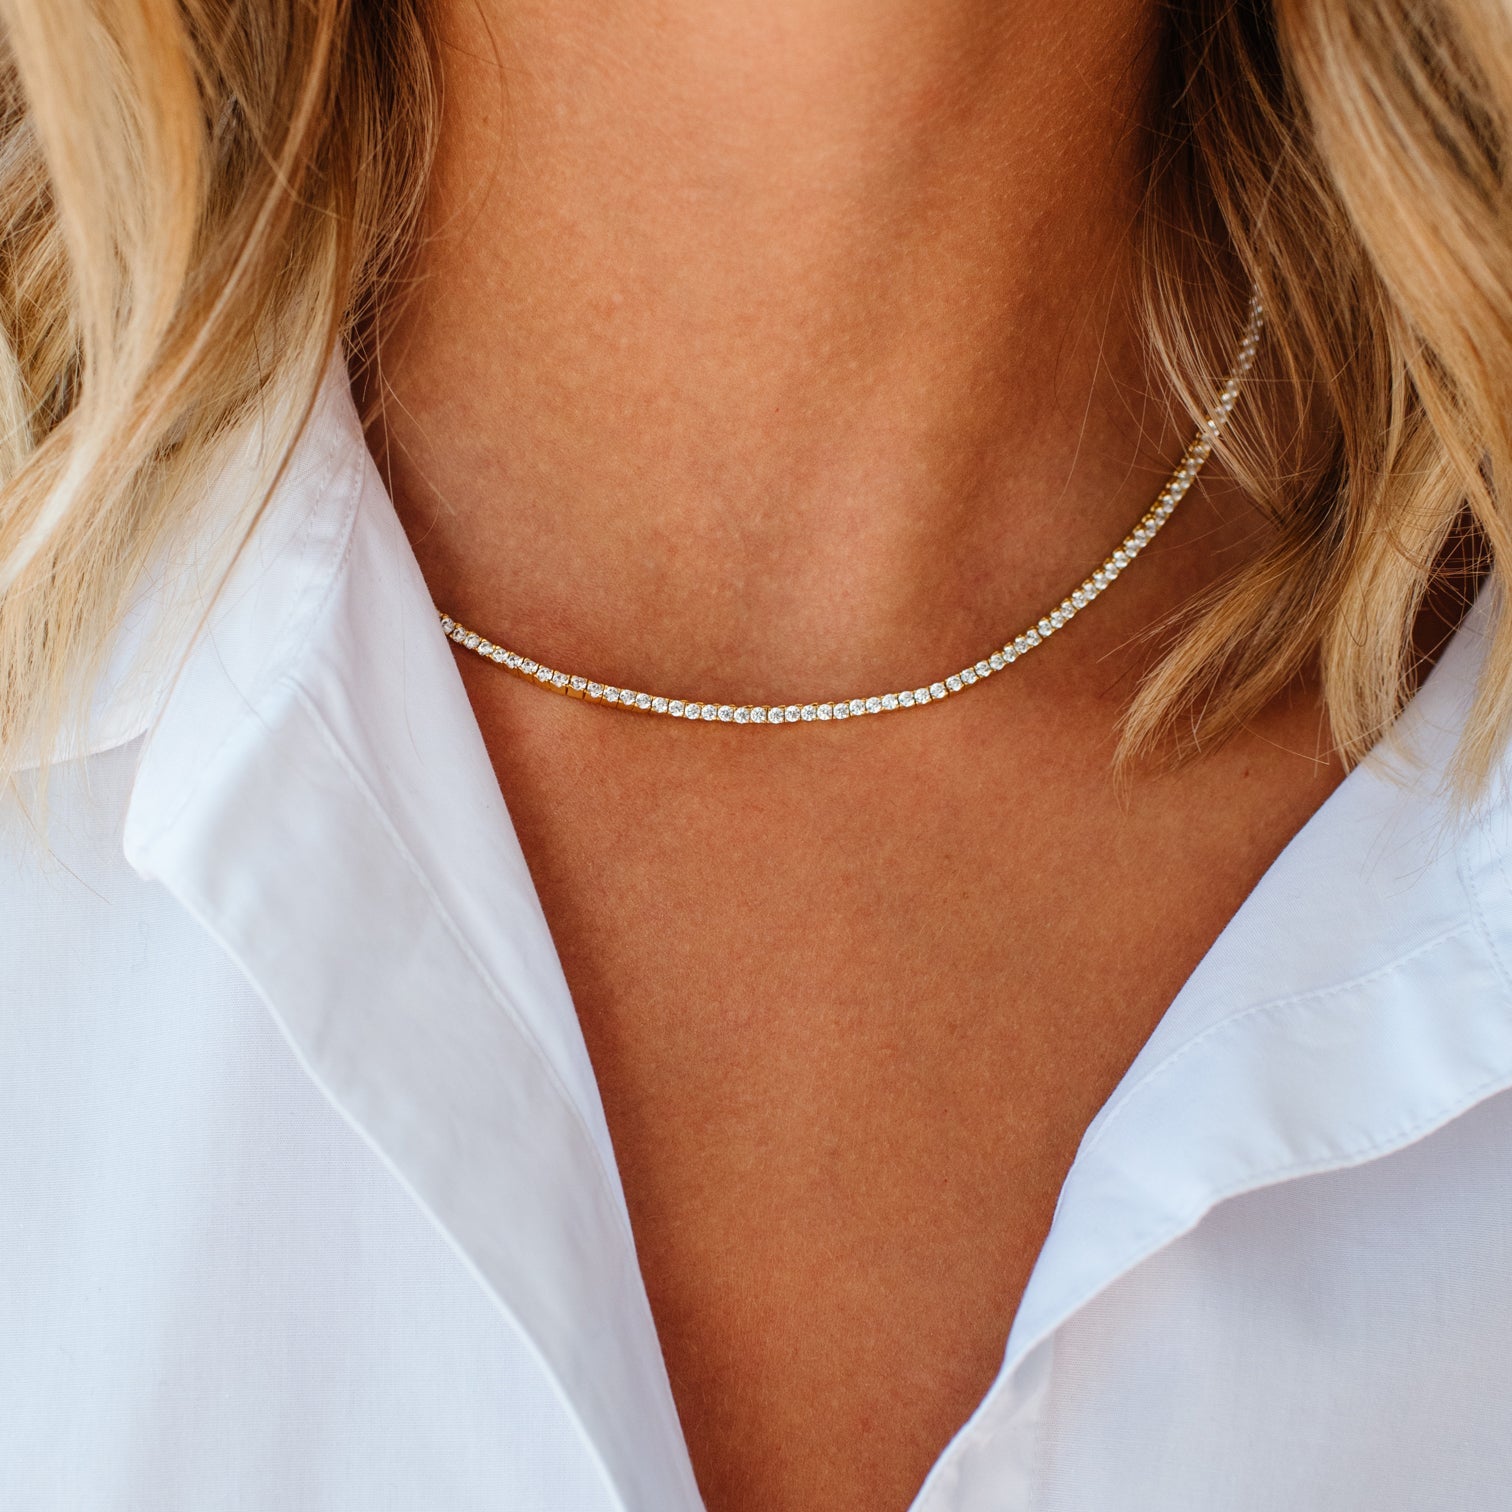 LOVE TENNIS NECKLACE - CUBIC ZIRCONIA & GOLD - SO PRETTY CARA COTTER